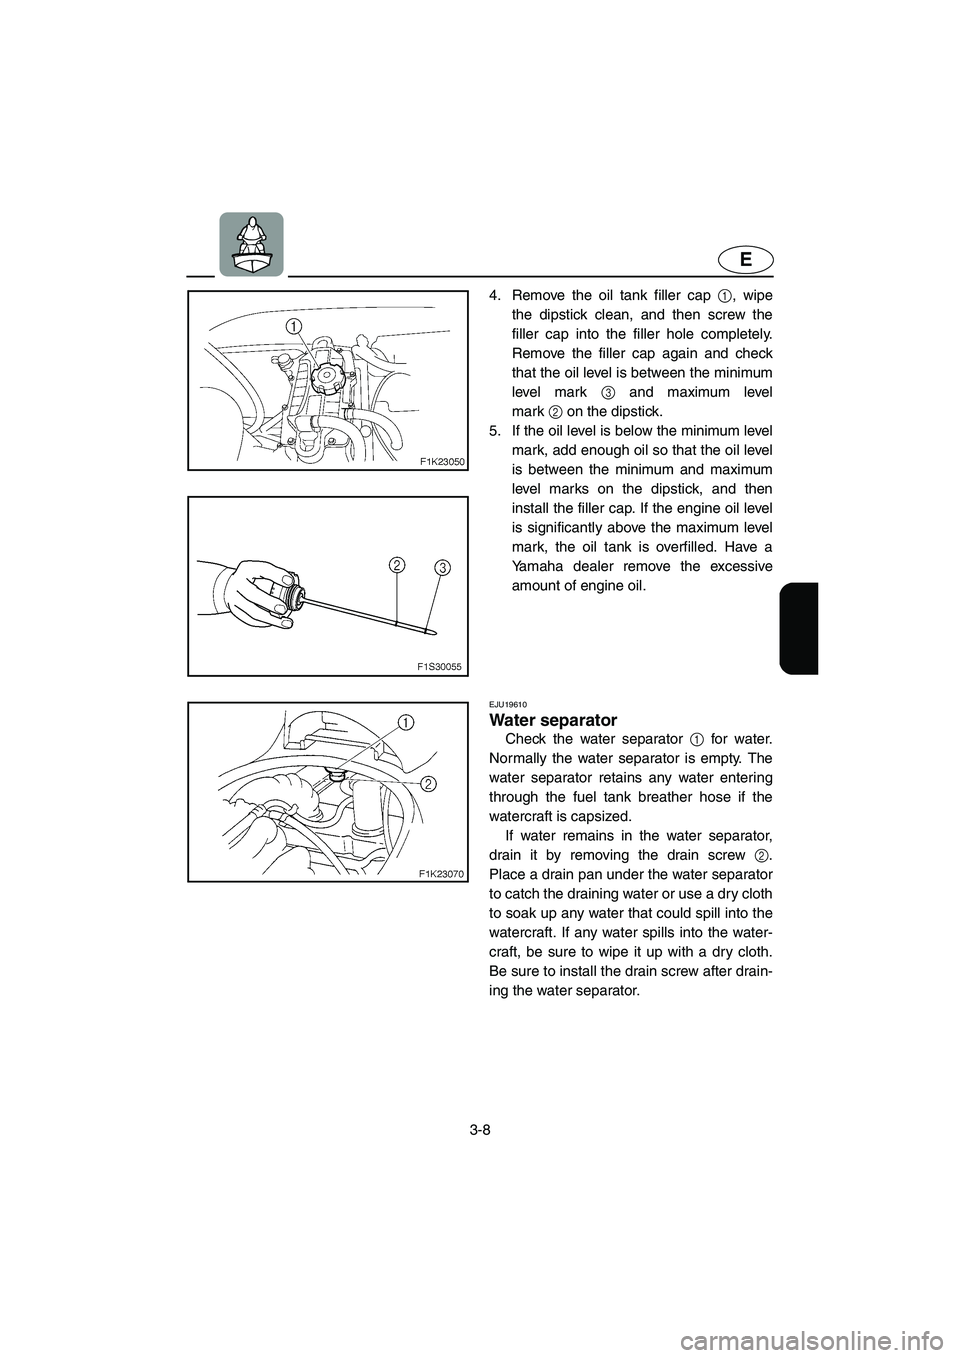 YAMAHA VX 2005  Owners Manual 3-8
E
4. Remove the oil tank filler cap 1, wipe
the dipstick clean, and then screw the
filler cap into the filler hole completely.
Remove the filler cap again and check
that the oil level is between t